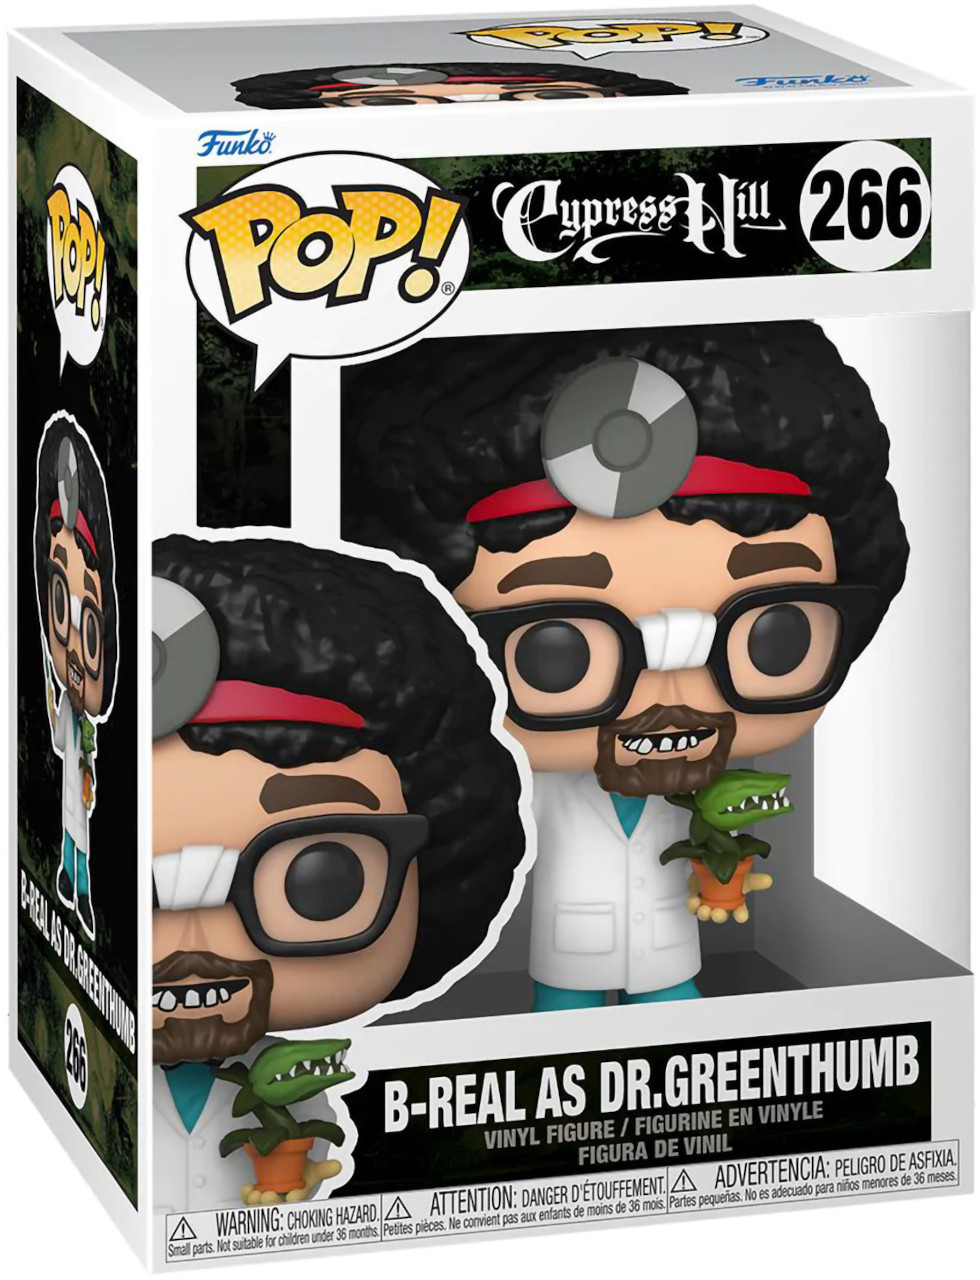 Фигурка Funko POP! Rocks Cypress Hill B-Real As Dr. Greenthumb 61442 10pcs painting rocks kindness stones smooth surface river pebble stones for diy crafts painting 4 6cm